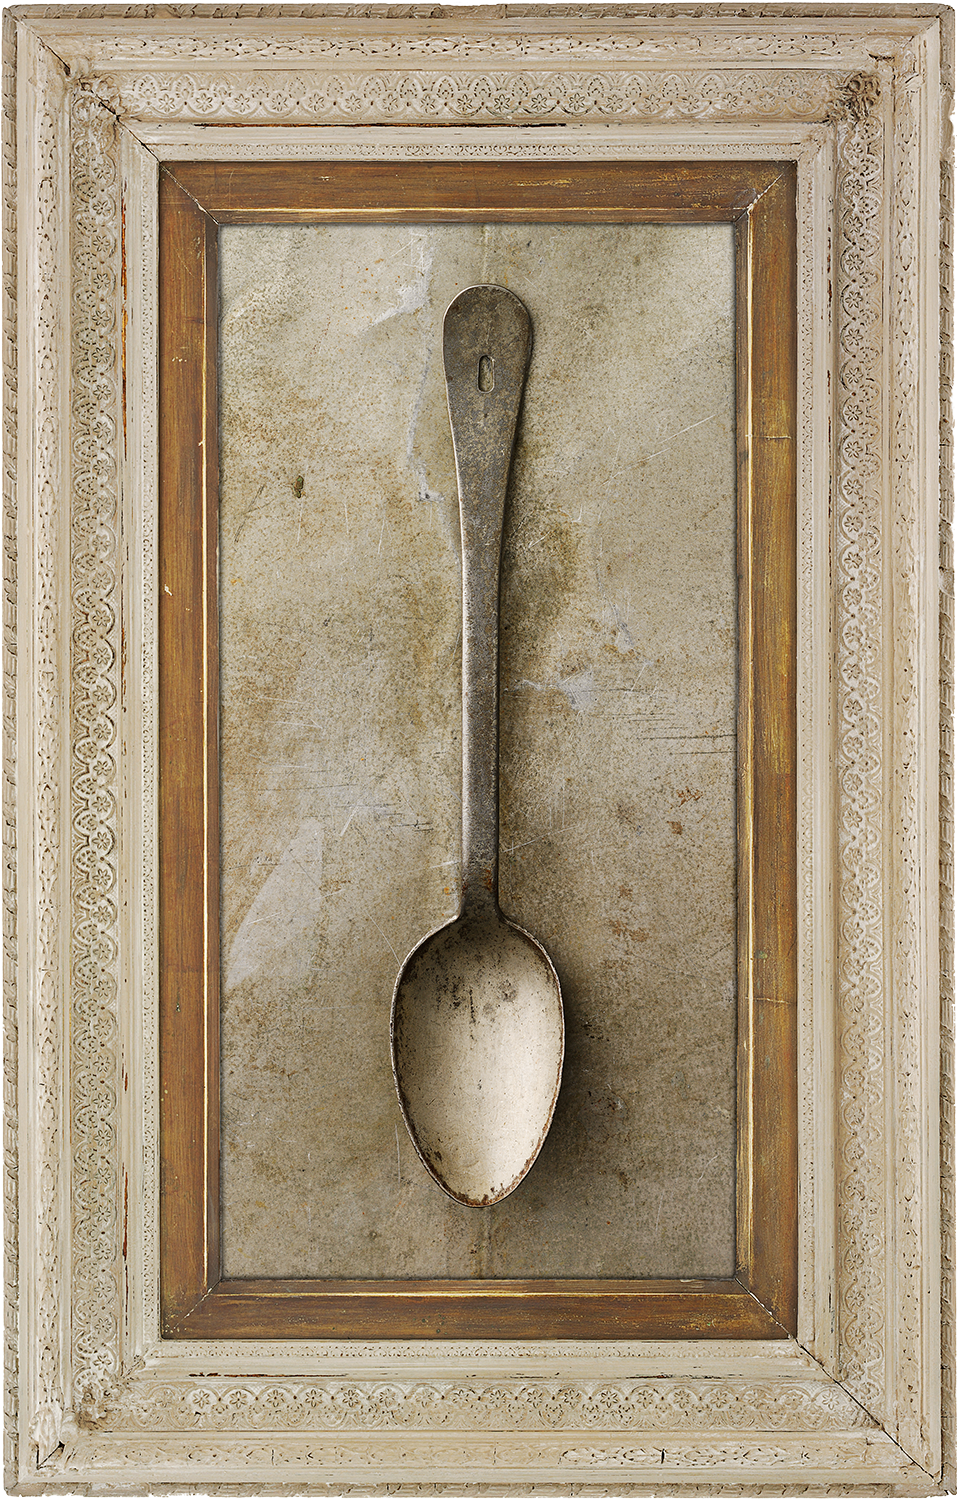 #5 Large Serving Spoon